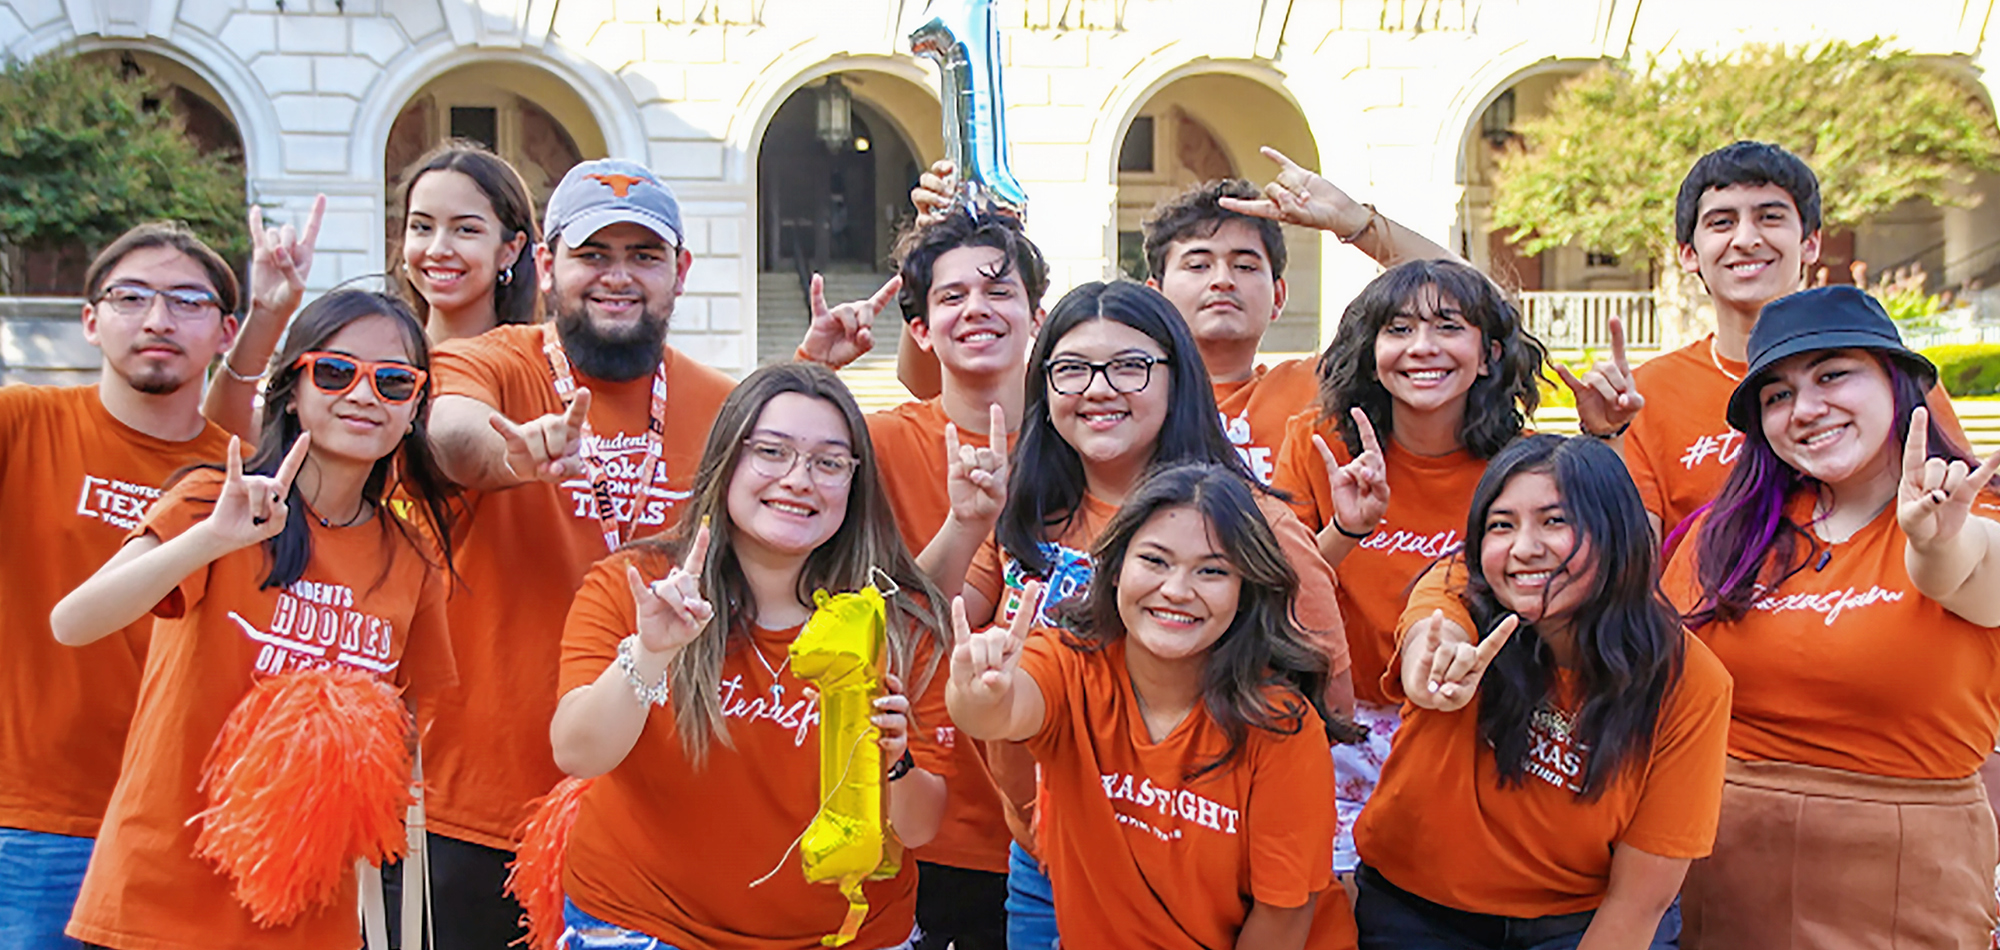 First Gen Students Gathered Together Wearing Orange and Each Making the Longhorn Gesture